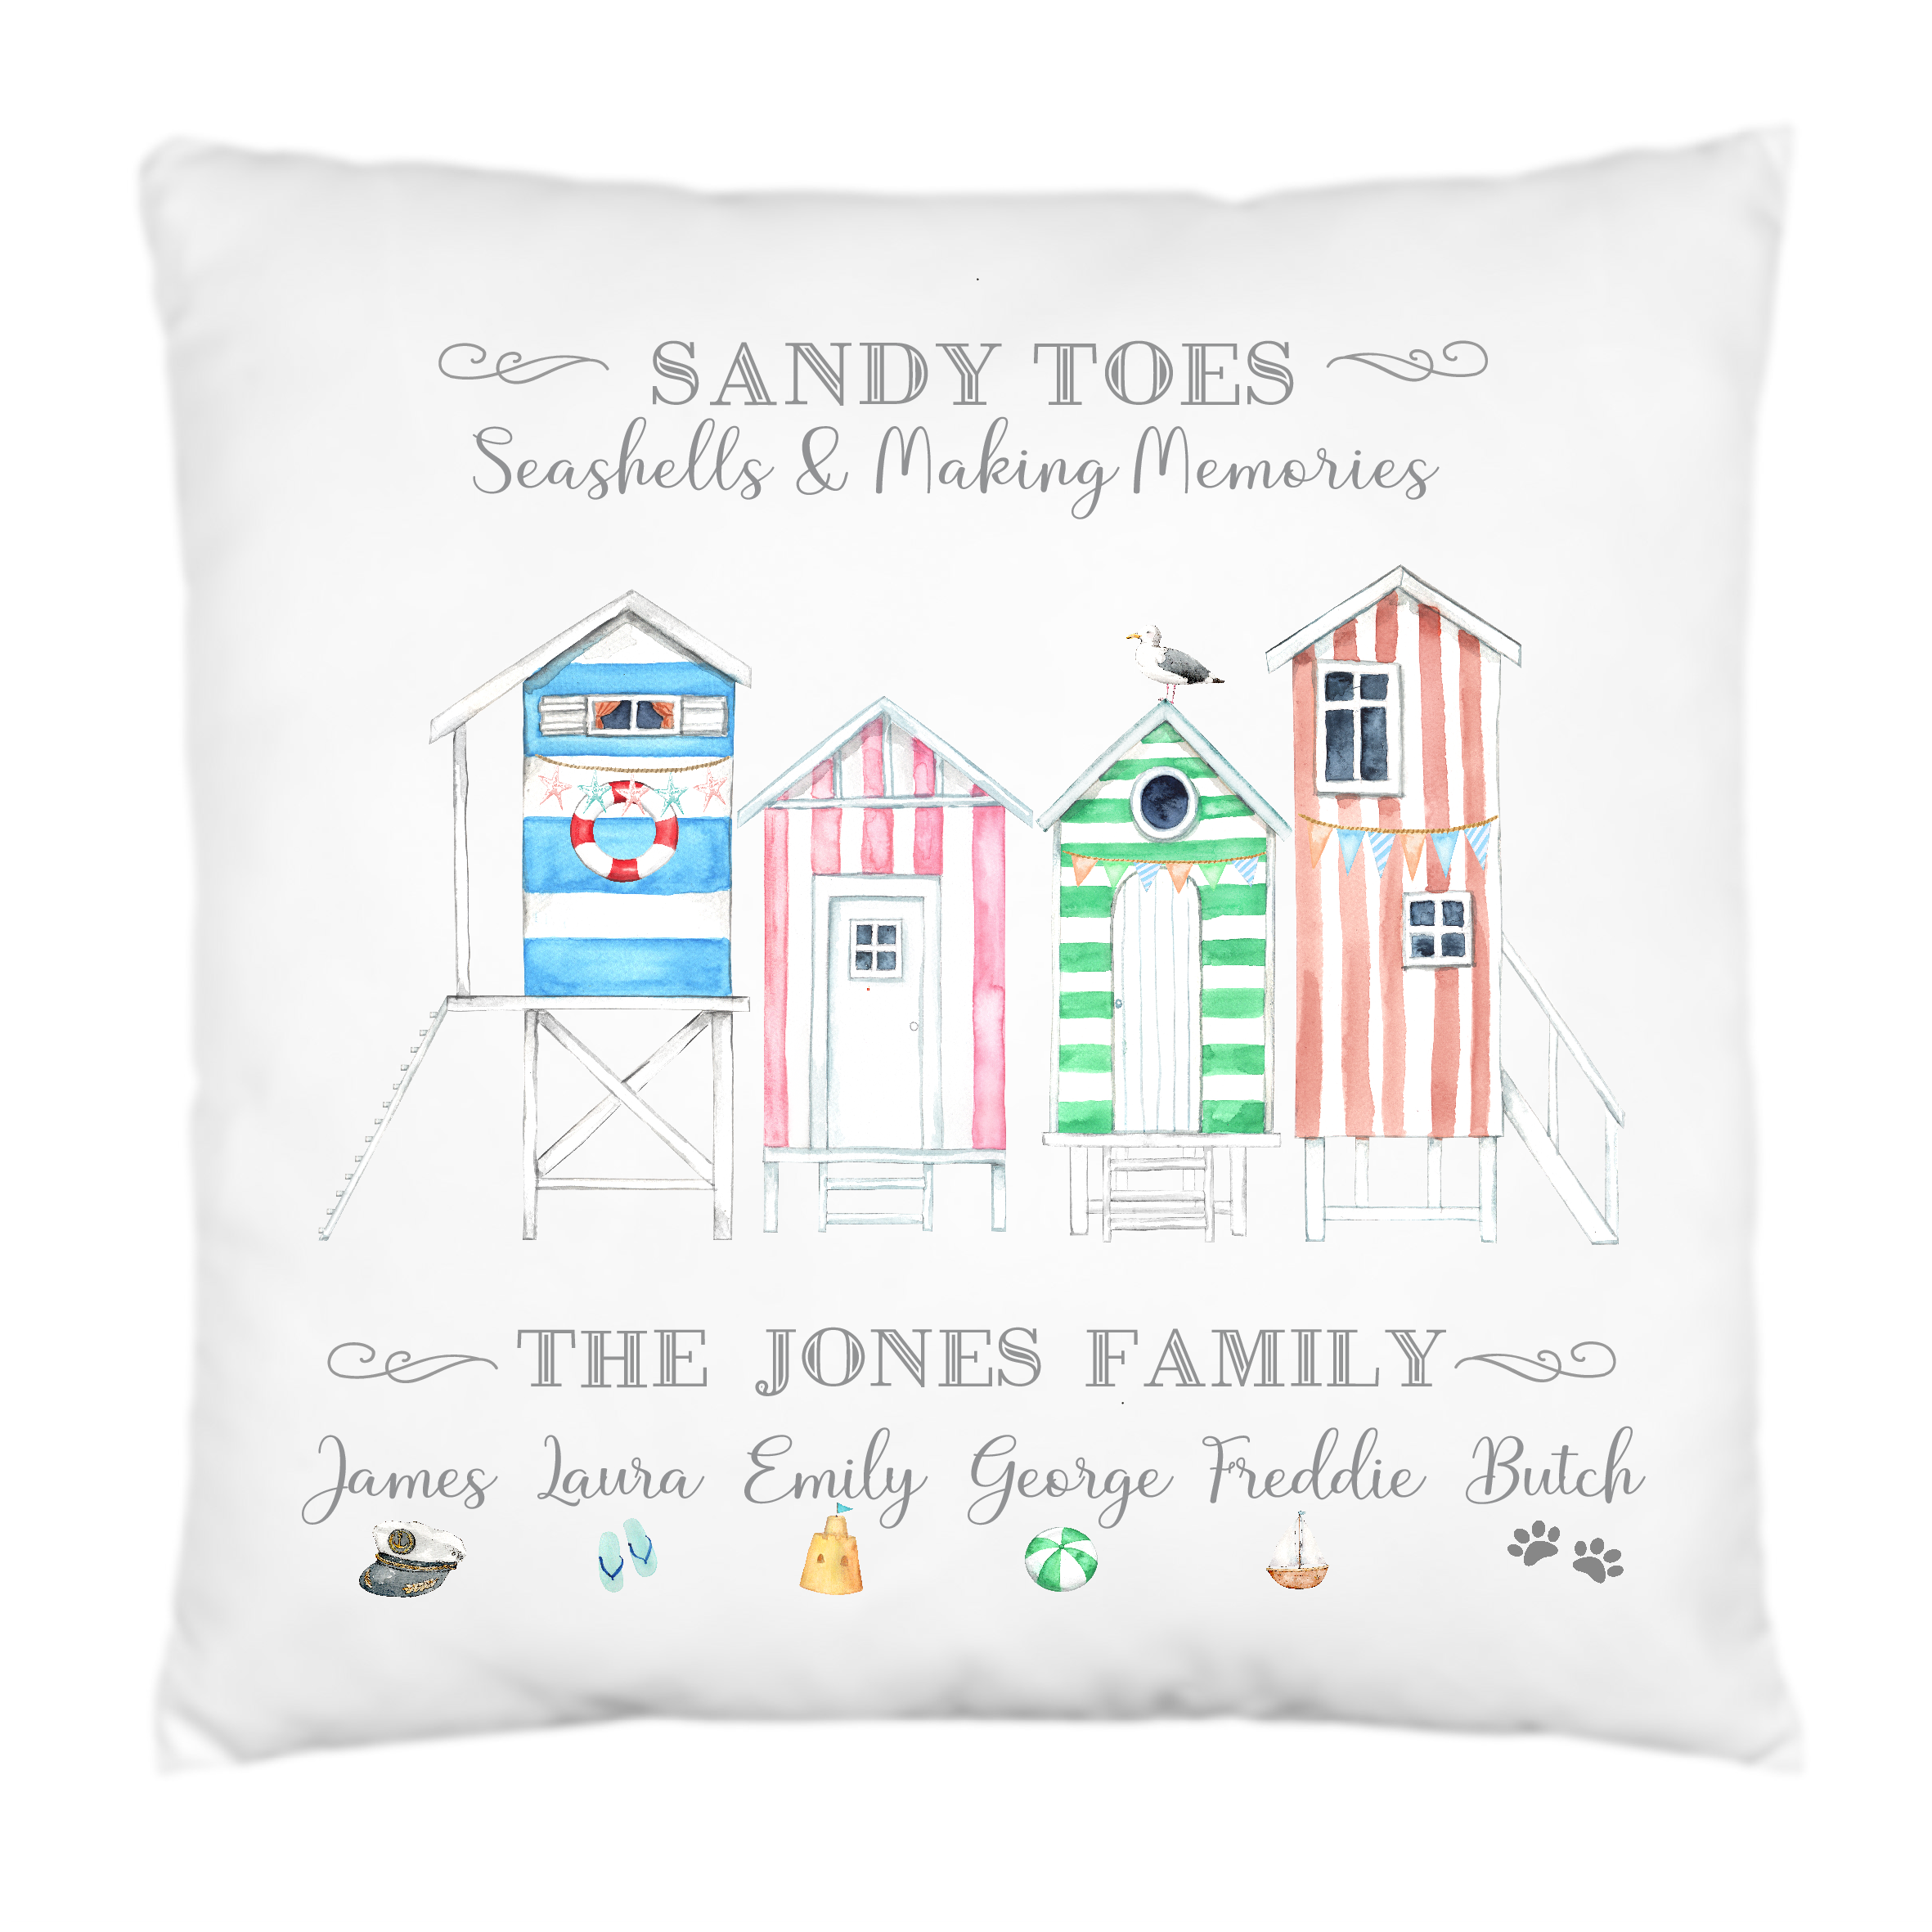 Personalised Beach Huts Cushion,Pillow,Seaside and Family Summer Holidays,40cms Square